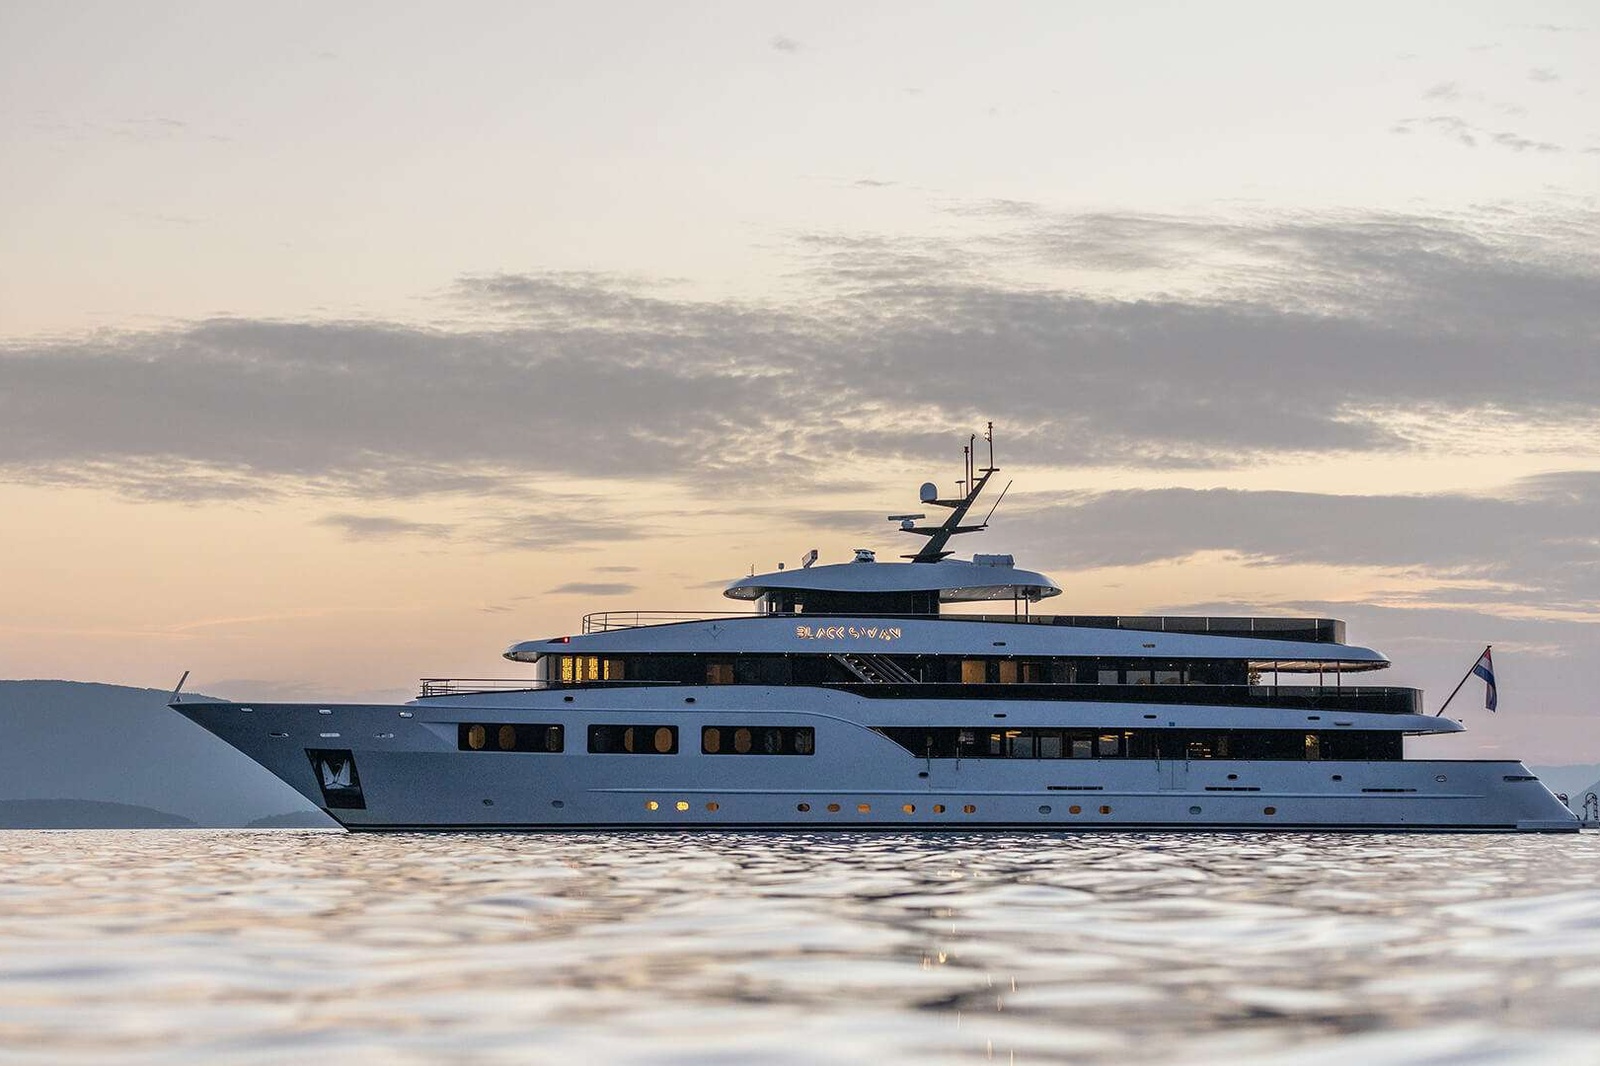 The Black Swan is coming our way  - We are very pleased to announce some very big news: the gorgeous, one-of-a-kind luxurious 49-meter motor vessel the Black Swan will nest in charter fleet in 2024. 

Custom-built in 2018 in Croatia as a premium boutique cruiser, the Black Swan stood out from the very beginning with its extravagant design and service tailored to the most discerning guests. She is now undergoing a complete refit to become a truly unique private luxury charter yacht with an extended crew and masterfully personalized service. 

Her name, the Black Swan, stands for beauty, grace and rarity. For the longest time, black swans were believed to be mythical creatures. Today, when we know for a fact they exist, they still lend their name to describe unexpected events that come as a surprise and create a far-reaching ripple effect. There is no doubt that the Black Swan will live up to her name.  
Once the refit is complete, she will offer plush accommodation for up to twenty guests in her ten double cabins. No less than three are master cabins, each situated on one deck. The remaining queen and king-size en suites  will be convertible into twins, allowing great flexibility for diverse or multigenerational parties. One multipurpose room on the lower deck can double as a single cabin or be transformed into a playroom, a PlayStation lounge for kids, a media cabin or an office.

Her ample common spaces are ideal for great time together as well as wonderful moments in privacy. Relaxation seekers will appreciate the many areas for soaking up the sun, from the expansive sundeck with sun loungers to the fly deck Jacuzzi where bubbly sunsets pair perfectly with a glass of champagne. Adventures are always on option, with water toys galore including  jet skis, water skis, sea bobs, SUPs, a water slide and more. Those who favor solid ground will love the e-bikes that make it easy to spontaneously explore islands and shores. 

With seamless communication between the indoor lounge and aft deck, her expansive main deck can host a variety of themes and feels. Opportunities for cozy and quiet moments sit scattered throughout. Guests can enjoy morning papers over an espresso by the library nook, sip on whiskey in the cigar corner and relish romantic whispers by the upright piano. Outside, sunset cocktails and dining al fresco come immersed in the gorgeous Adriatic sceneries. 

Dining is a special treat each time around, with a chef and sous chef fully dedicated to preparing delectable Mediterranean creations from the freshest ingredients sourced locally. Guests can enjoy Chef’s table dinners on the upper deck, breezy lunches in the aft deck lounge, and light snacks paired with the best wines anywhere, always tailored to special dietary requests. Whether a dinner is followed by starlit dancing by the sundeck cocktail bar, a casino night in the saloon or a movie night in the private indoor cinema, no two nights are alike. 
The gym and Finnish sauna make it easy to keep up health and fitness routines. With a masseur on board full time, every day can start with an energizing massage. Adding a yoga instructor to the crew is great for those who wish to start or end their days with a sunlit practice on the sundeck.  

Onboard the Black Swan, a dedicated crew of thirteen is made up of professionals with extensive experience of catering to the most refined preferences. A fully dedicated mainland-based concierge will take care of the guests’ special wishes, from organizing a batch of that special champagne for a party to tailoring excursions in the region. 
Coupling expansive space for twenty guests with deluxe comfort and state-of-the-art service, the tailored yachting experience onboard the Black Swan sets out to become as mythical as black swans themselves. 
What a great surprise to look forward to in 2024. 

